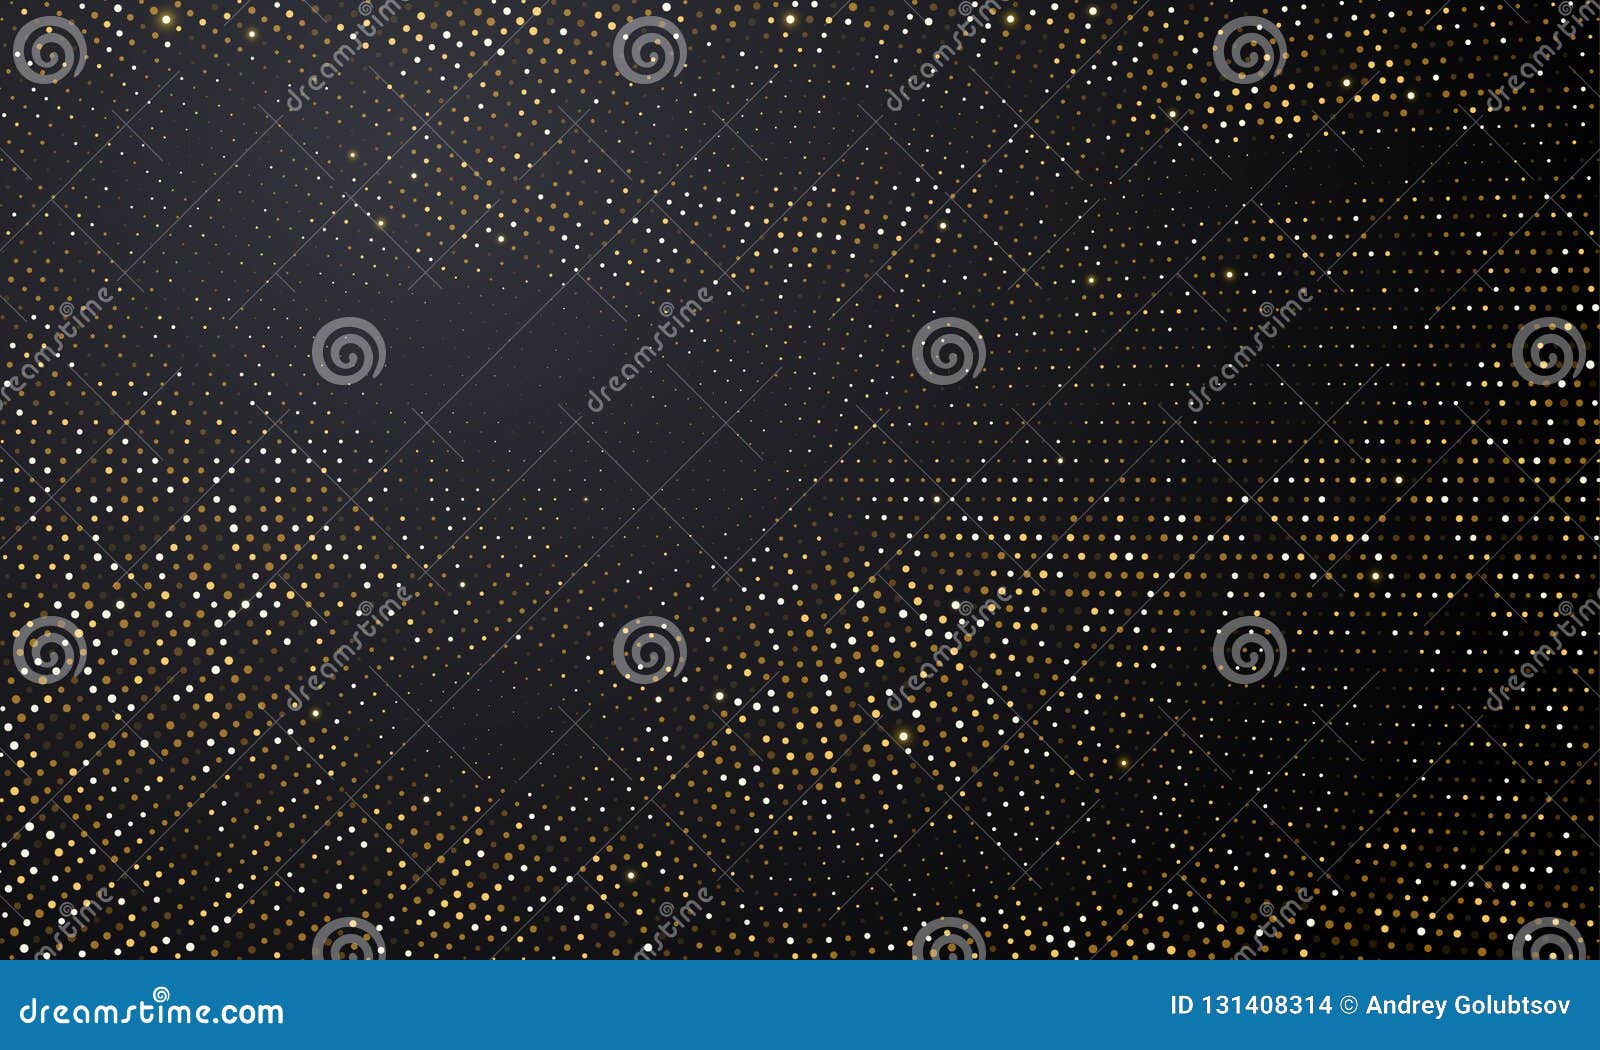 gold and silver halftone black background.  golden glitter circle sparkles on halftone shine pattern texture